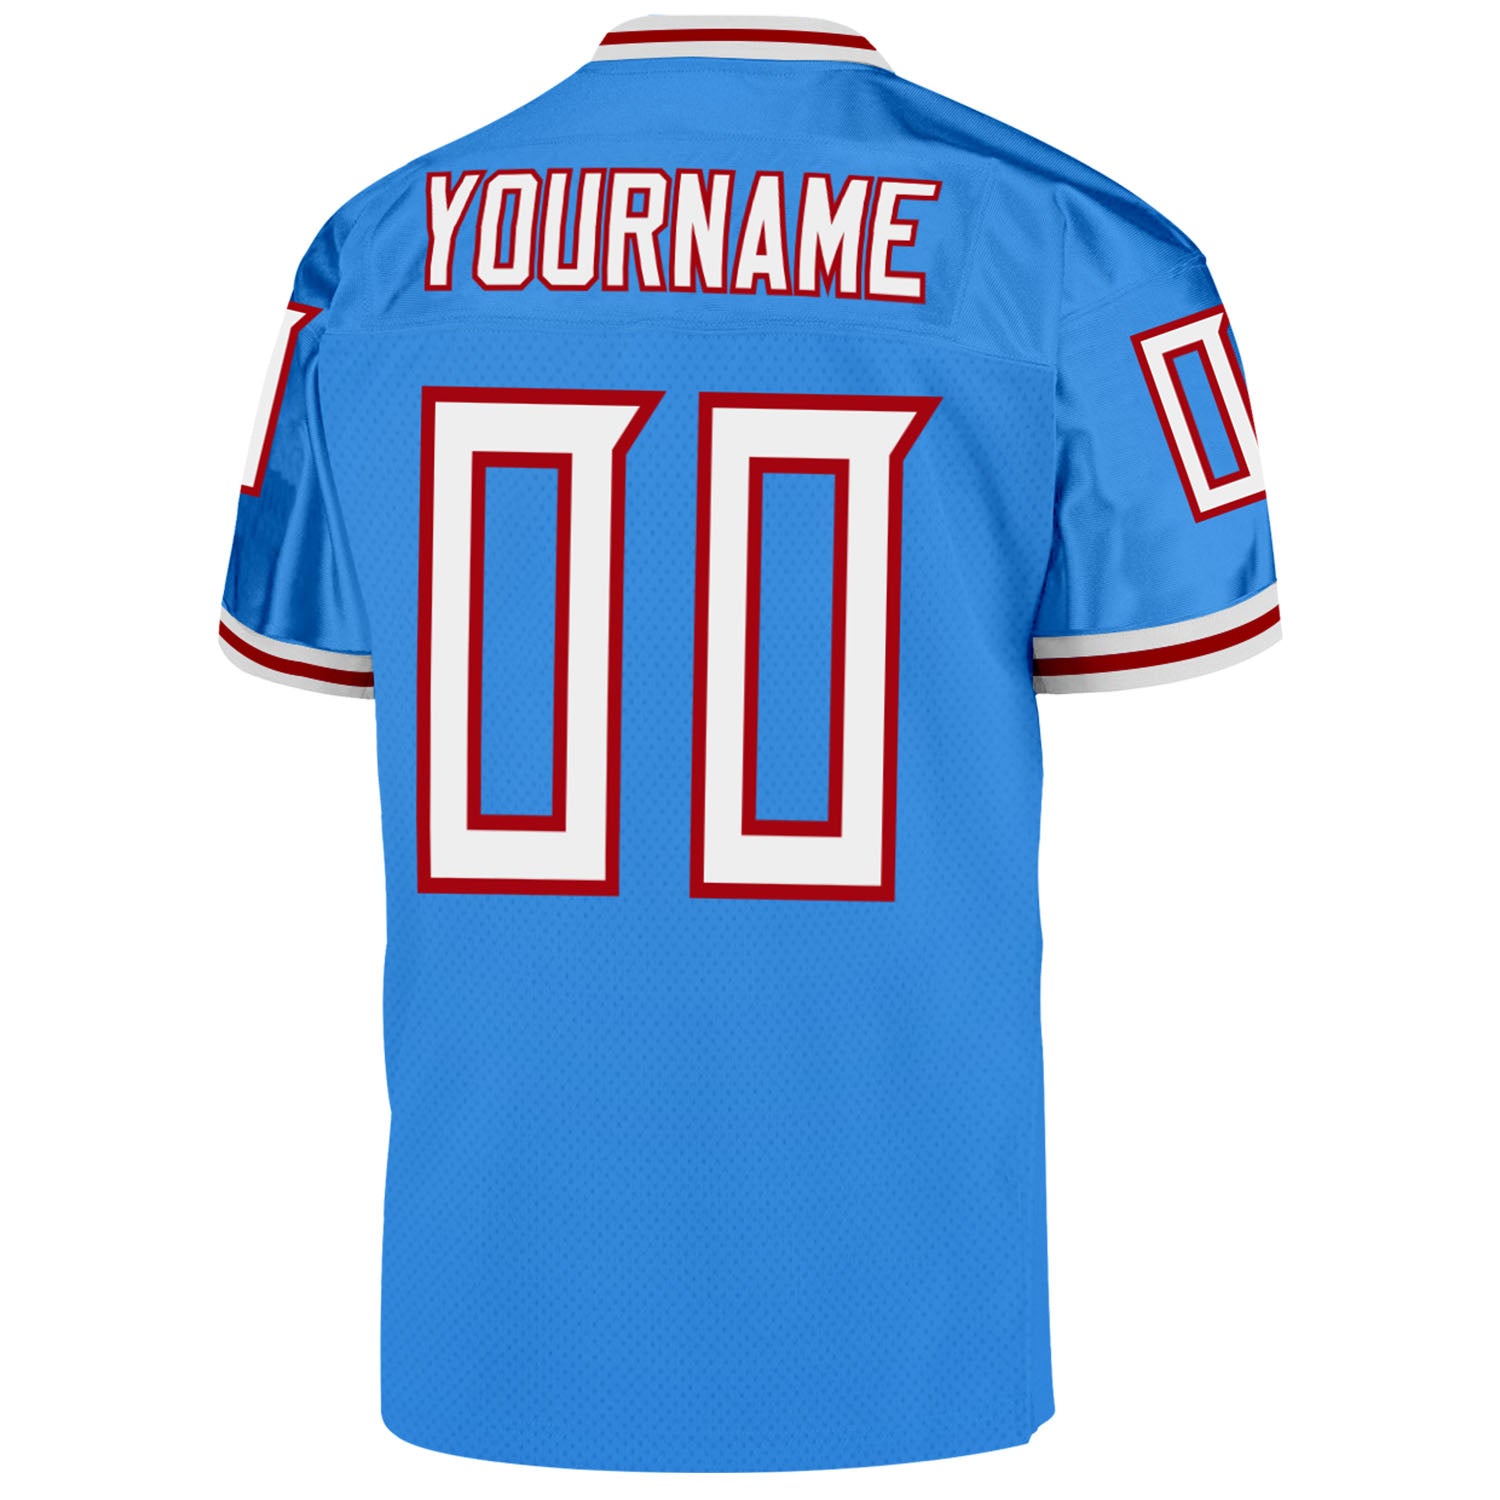 Custom Powder Blue White-Red Mesh Authentic Throwback Football Jersey